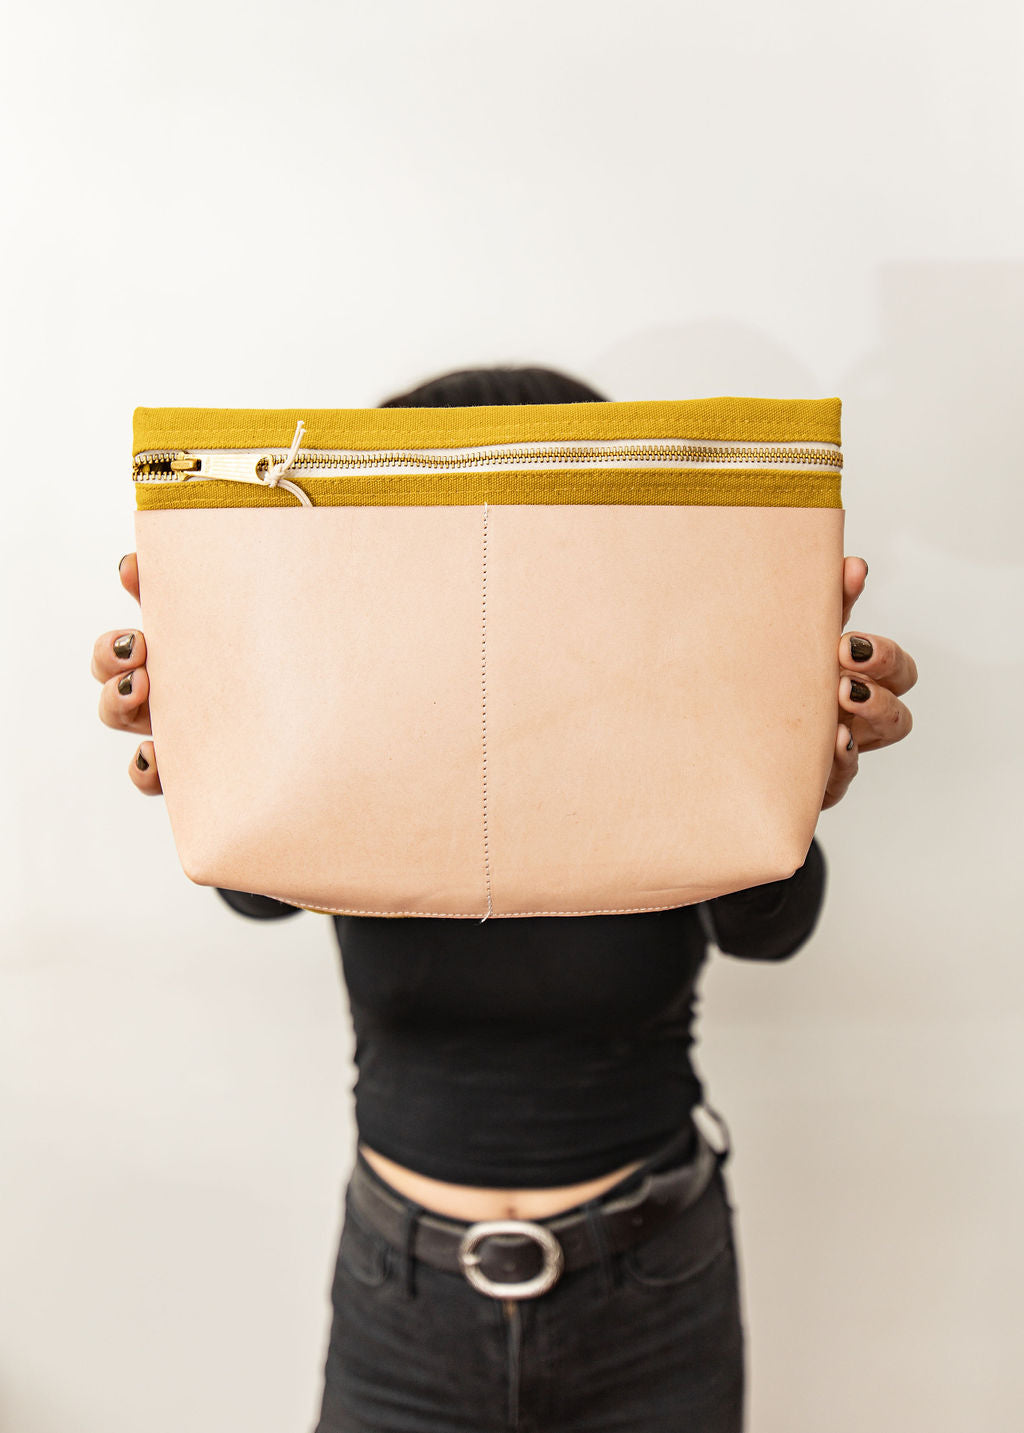 Large Hardware Pouch - Chartreuse